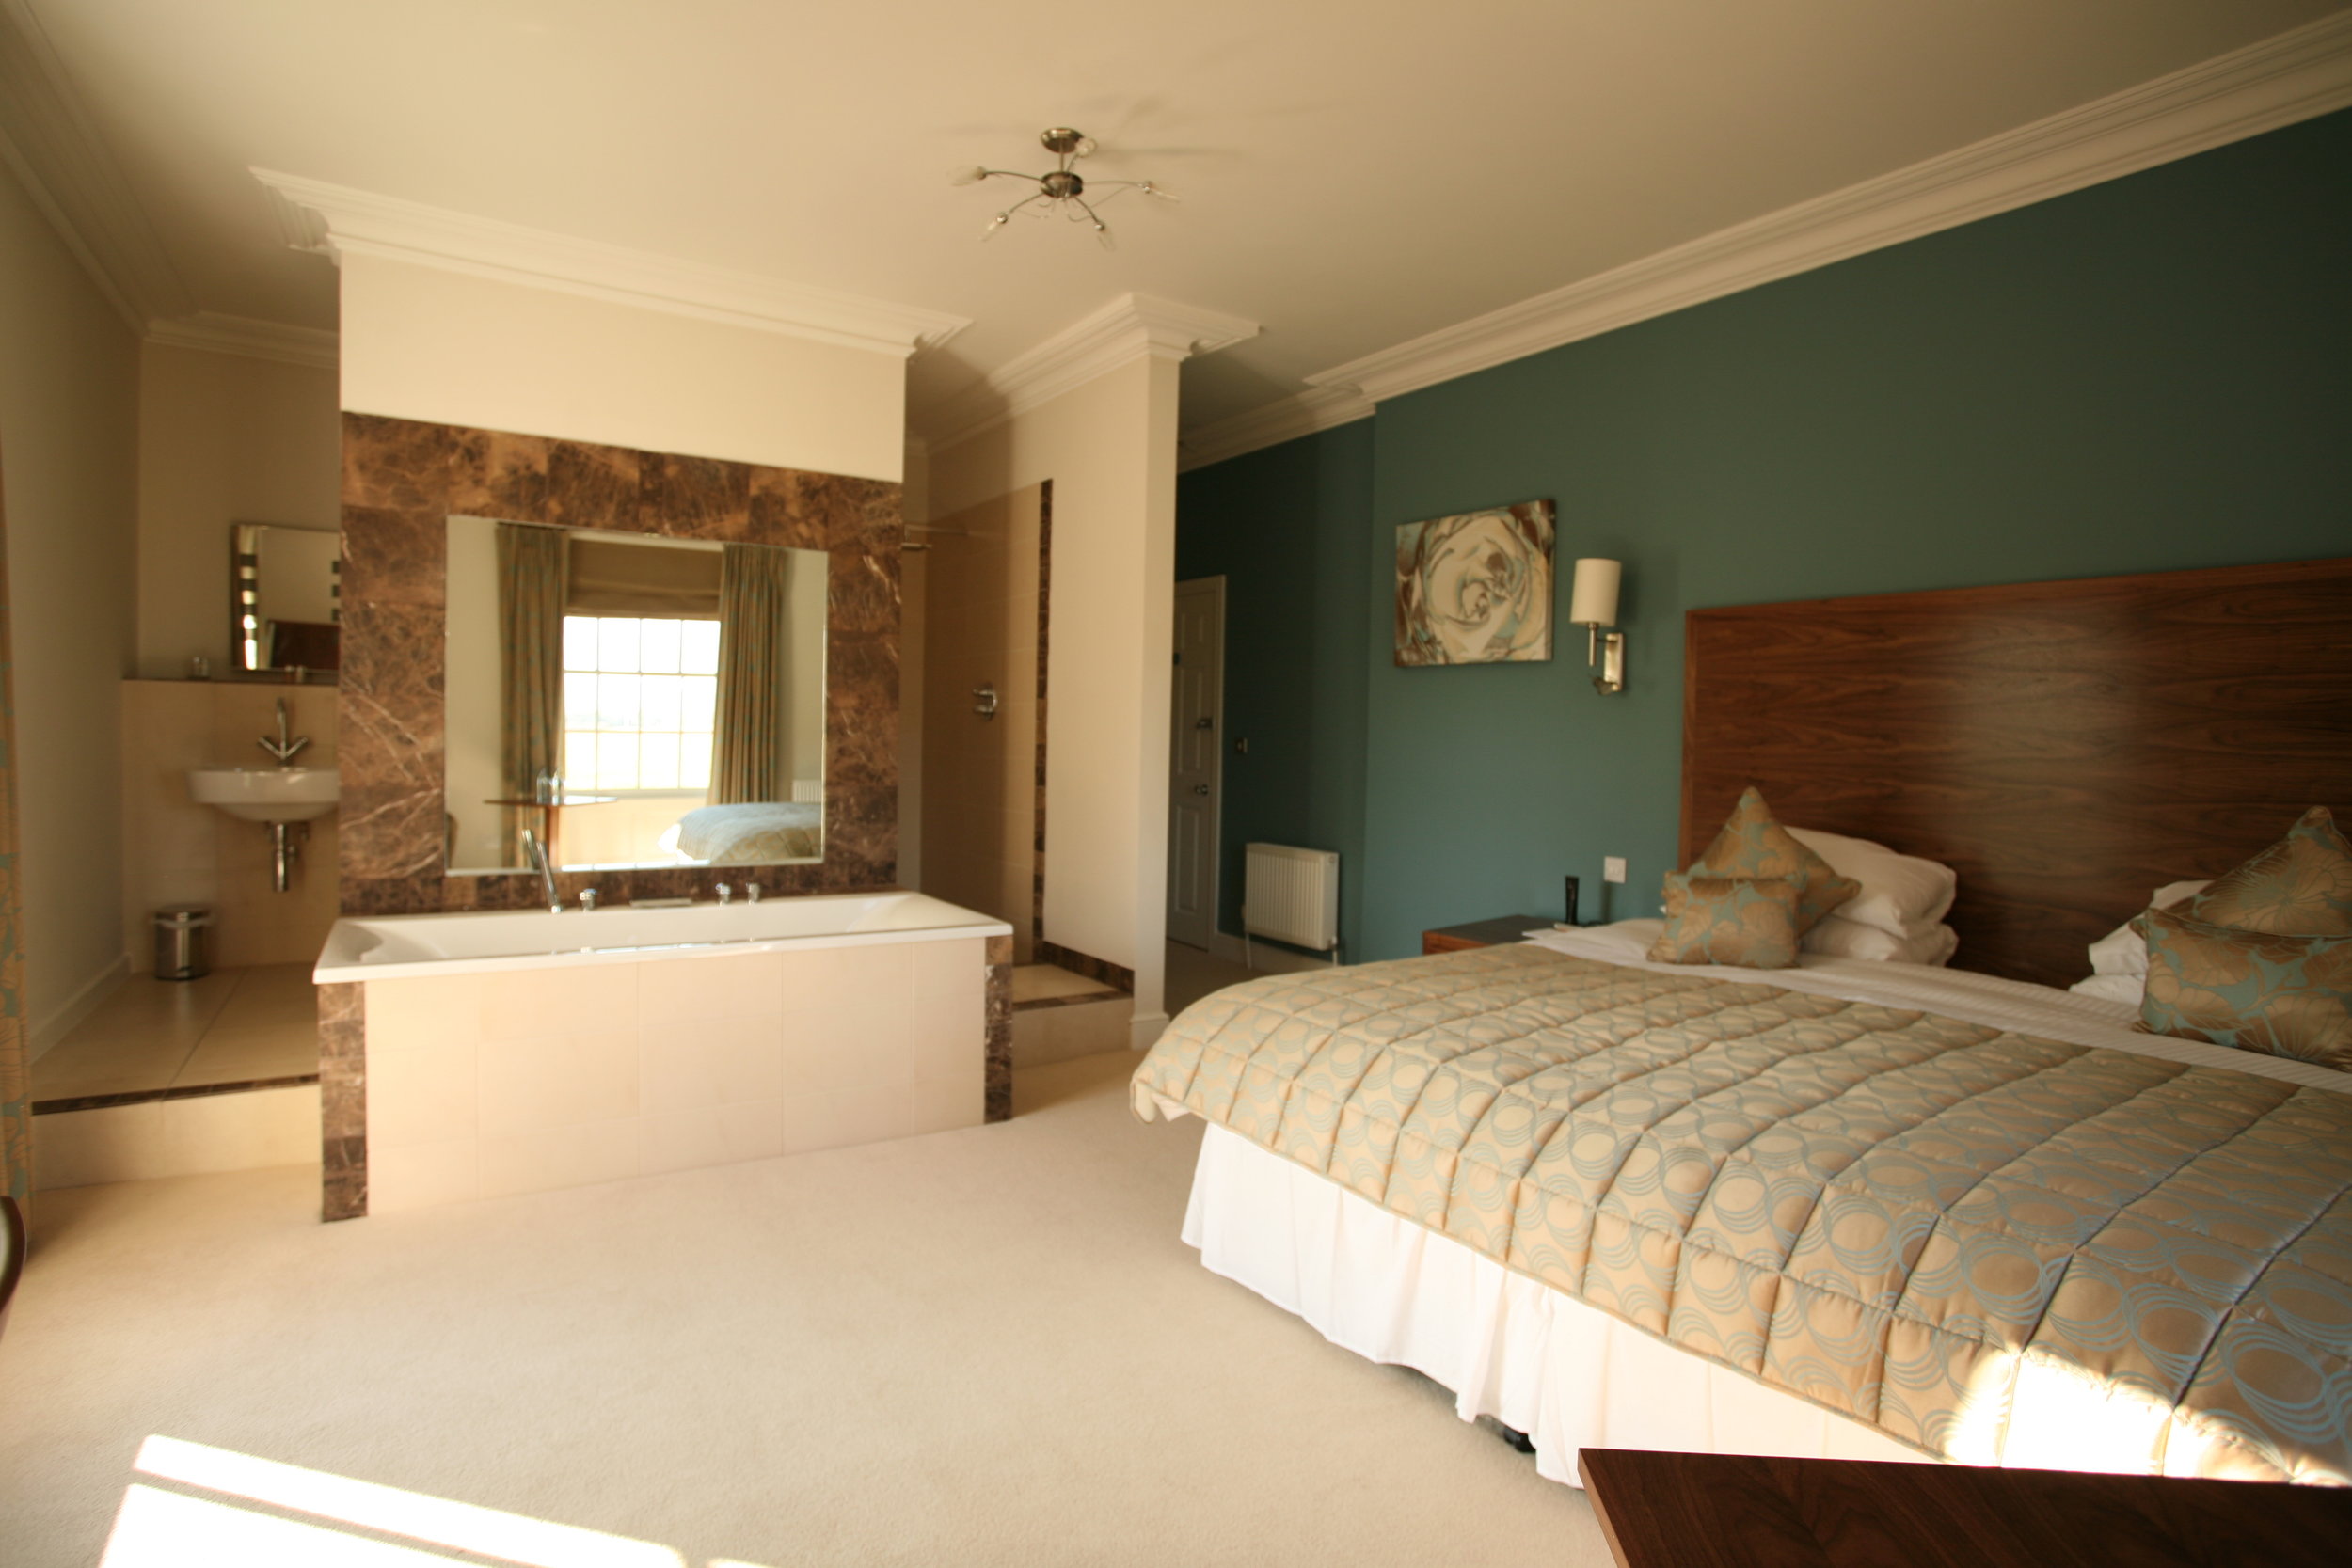 A suite retreat: bedroom with bath at Fishmore Hall